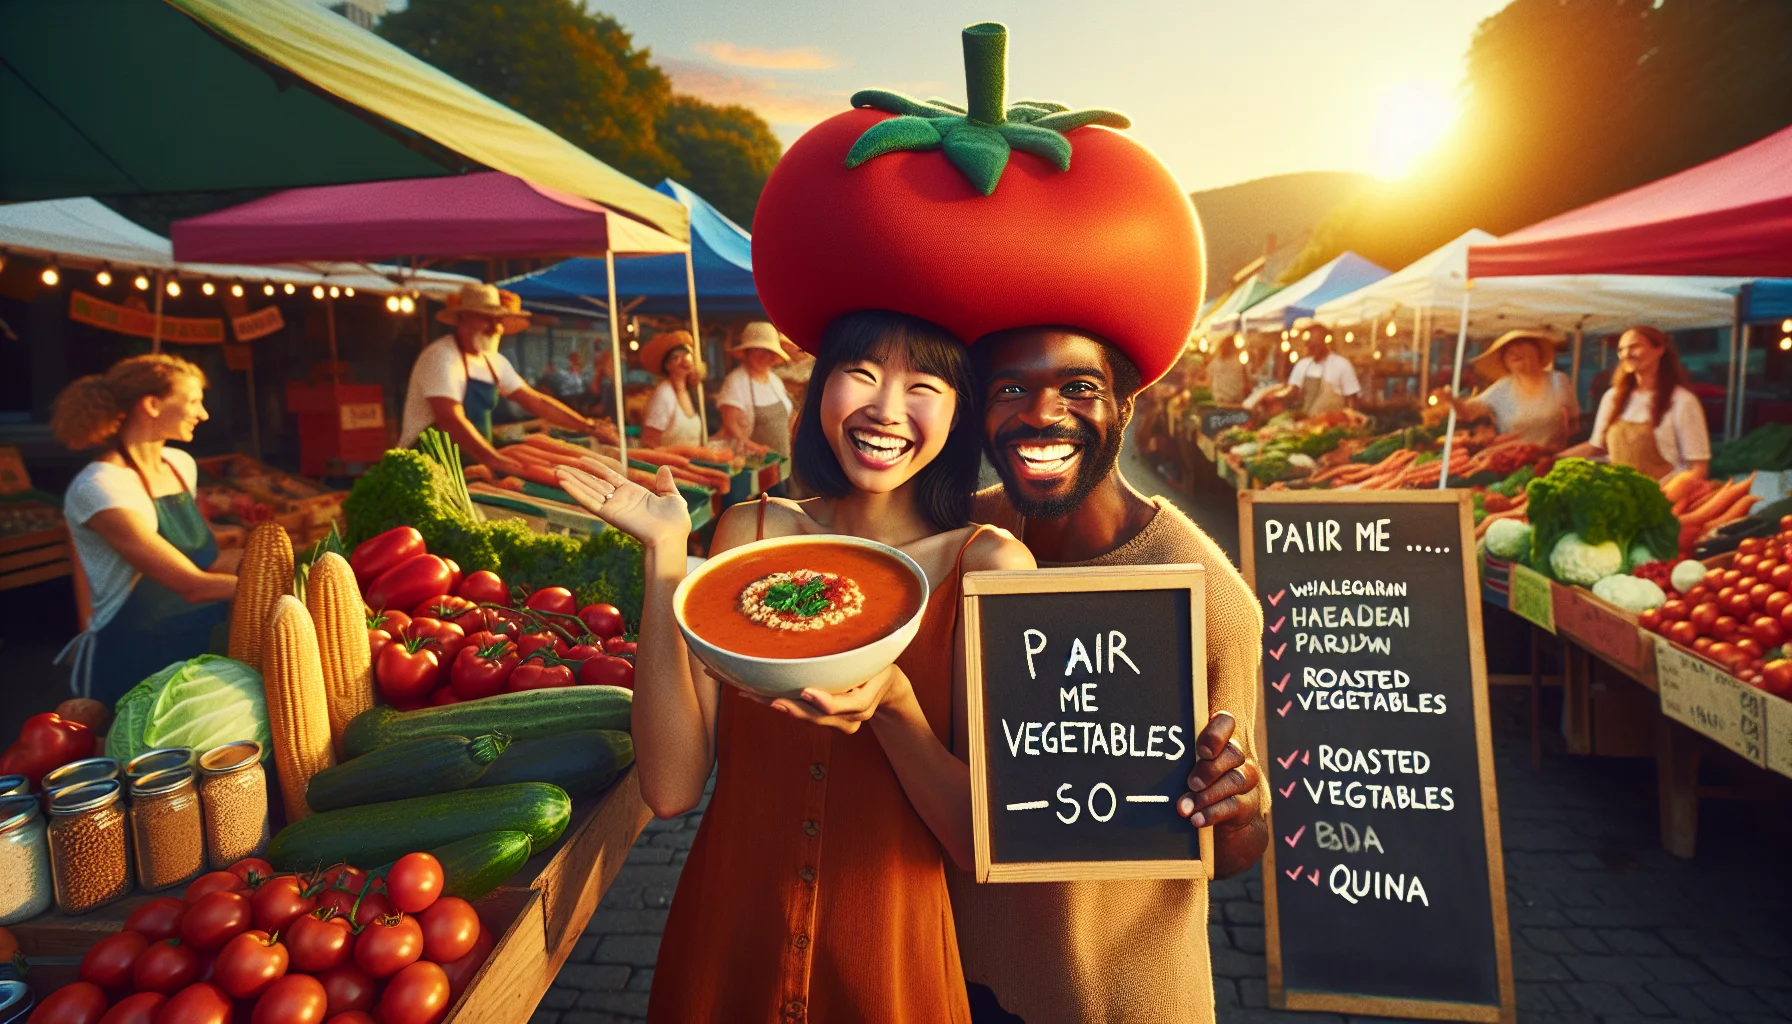 Create an image of a vibrant and colorful farmer's market scene with various stalls selling an assortment of healthy vegetables. One stall stands out - it's selling humorous tomato-shaped hats. In the foreground, an Asian woman wearing one of these funny tomato hats is smiling and holding a large bowl of steaming tomato soup. Next to her, a Black man enthusiastically displays a big sign that reads 'Pair me with...' followed by a chalkboard listing affordable, health-conscious choices like 'wholegrain bread', 'roasted vegetables', 'quinoa'. The setting sun casts a beautiful golden hue on their faces, encapsulating the joy of wholesome eating.